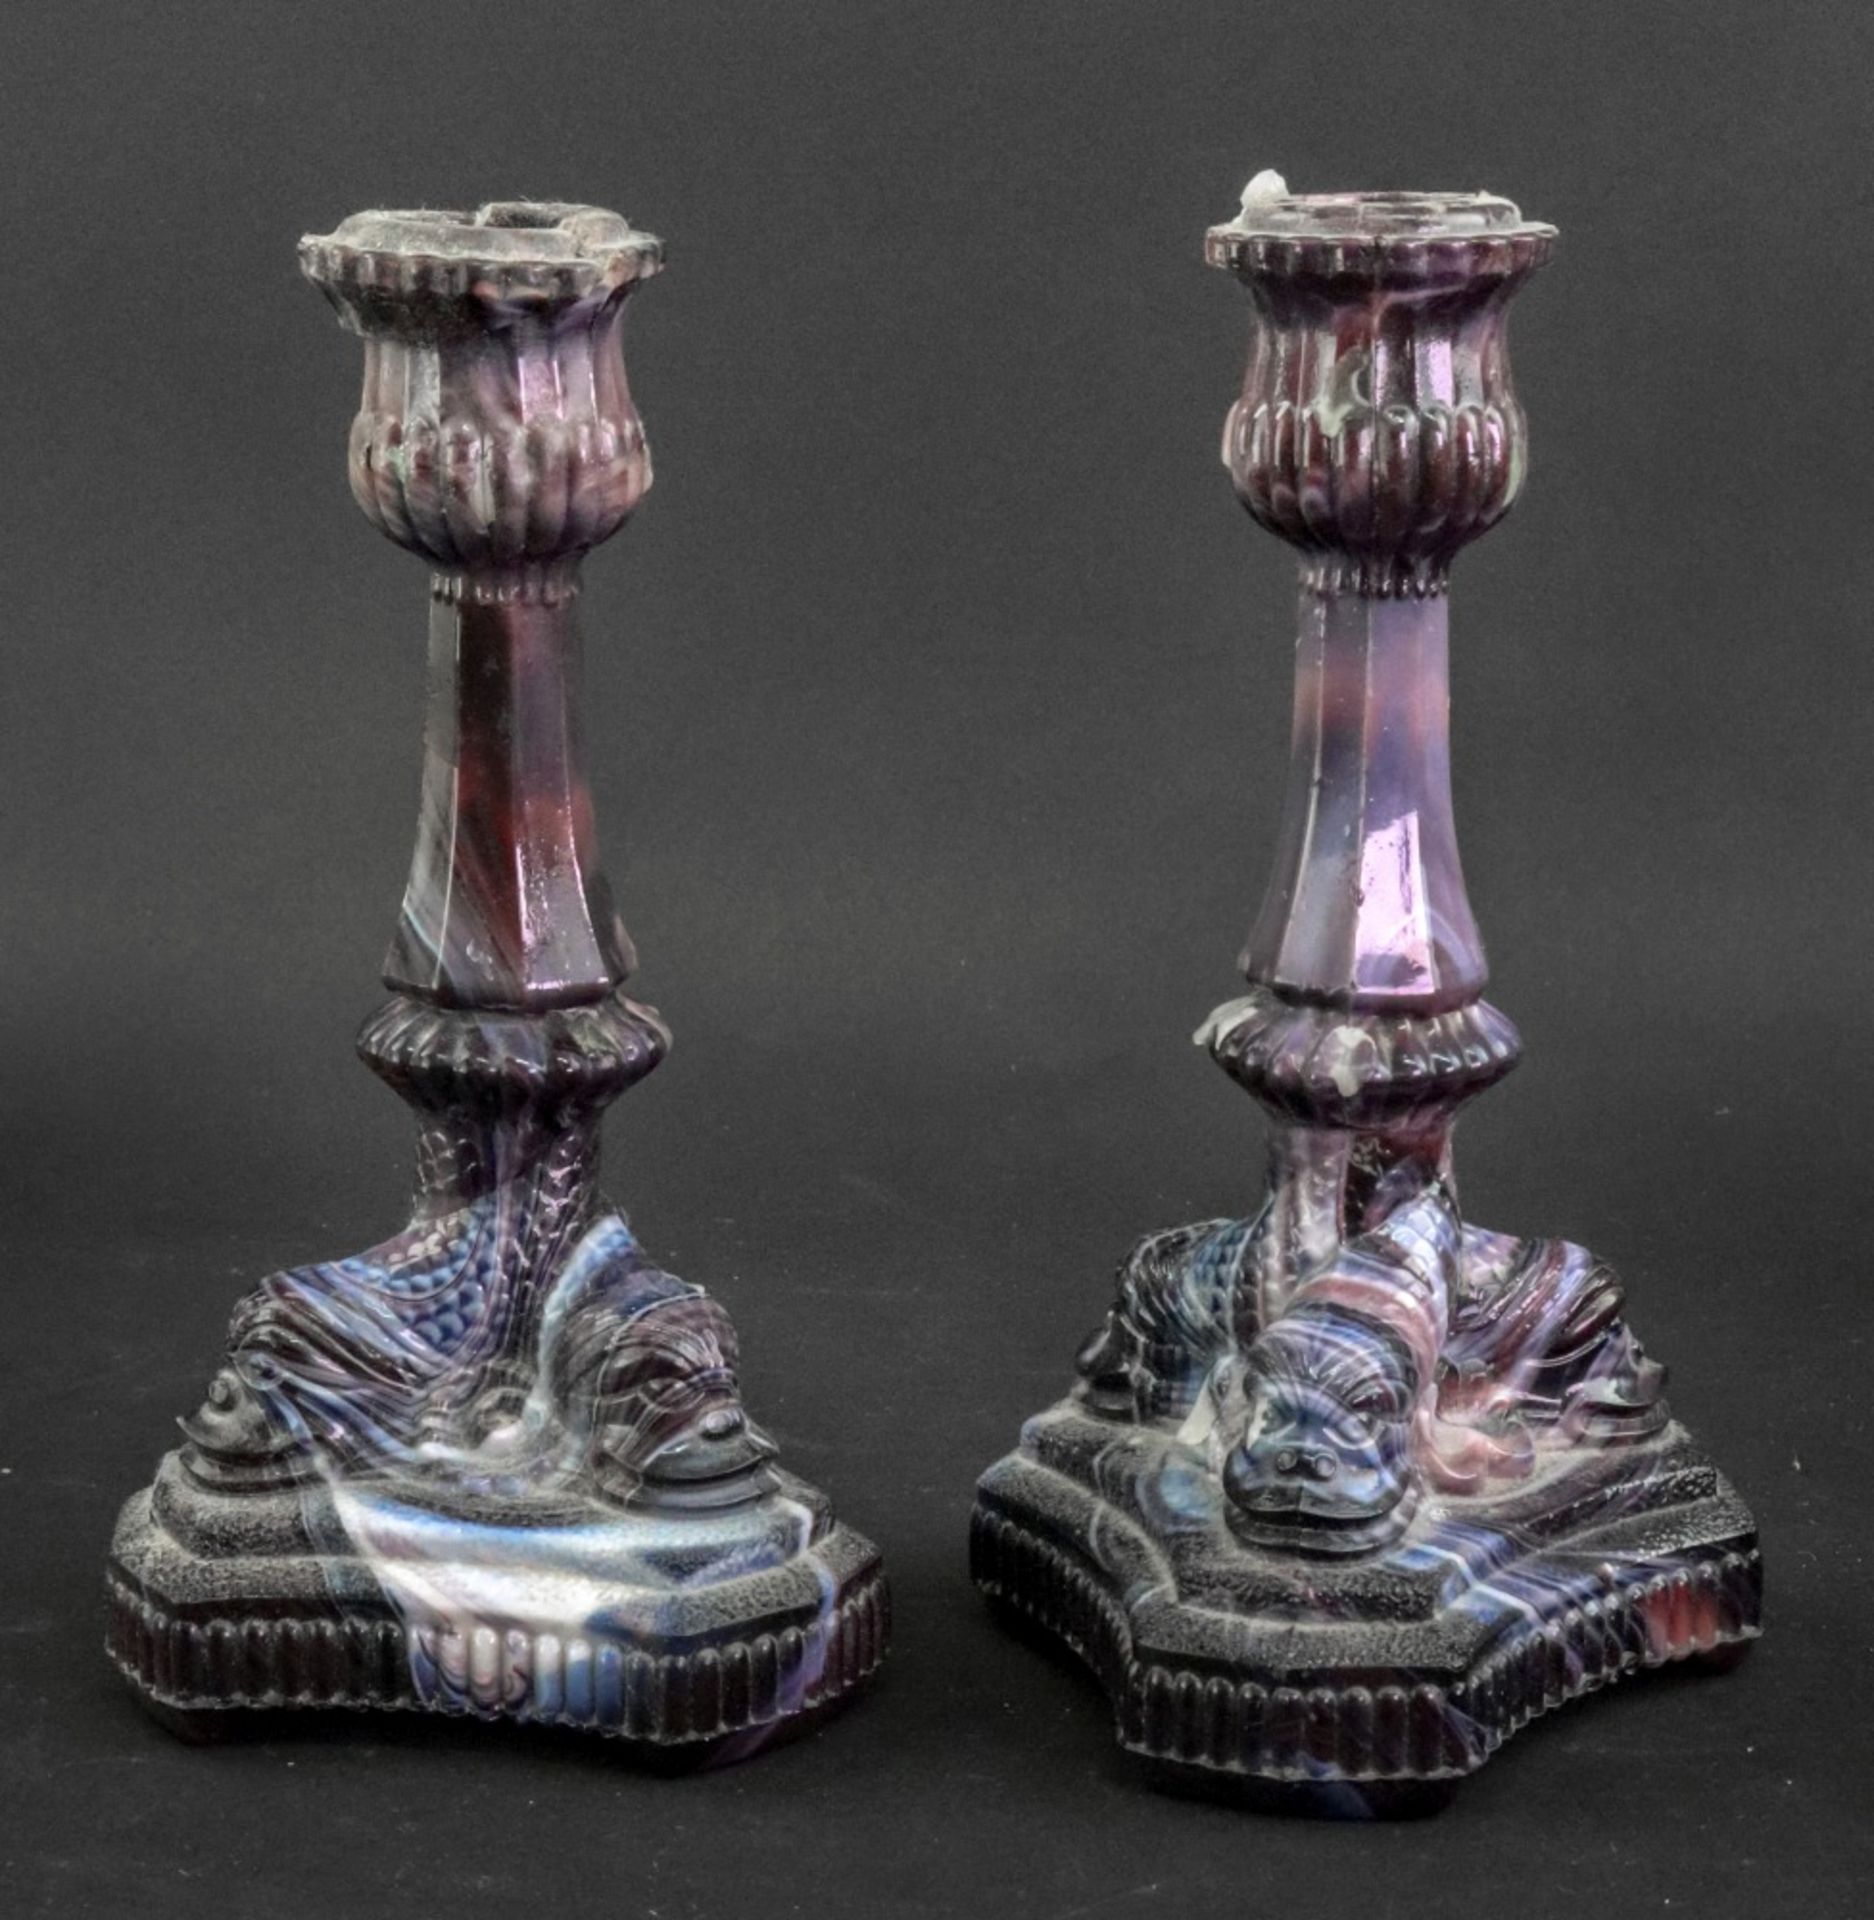 A pair of pressed glass candlesticks, late 19th century, of purple blue and white tones,